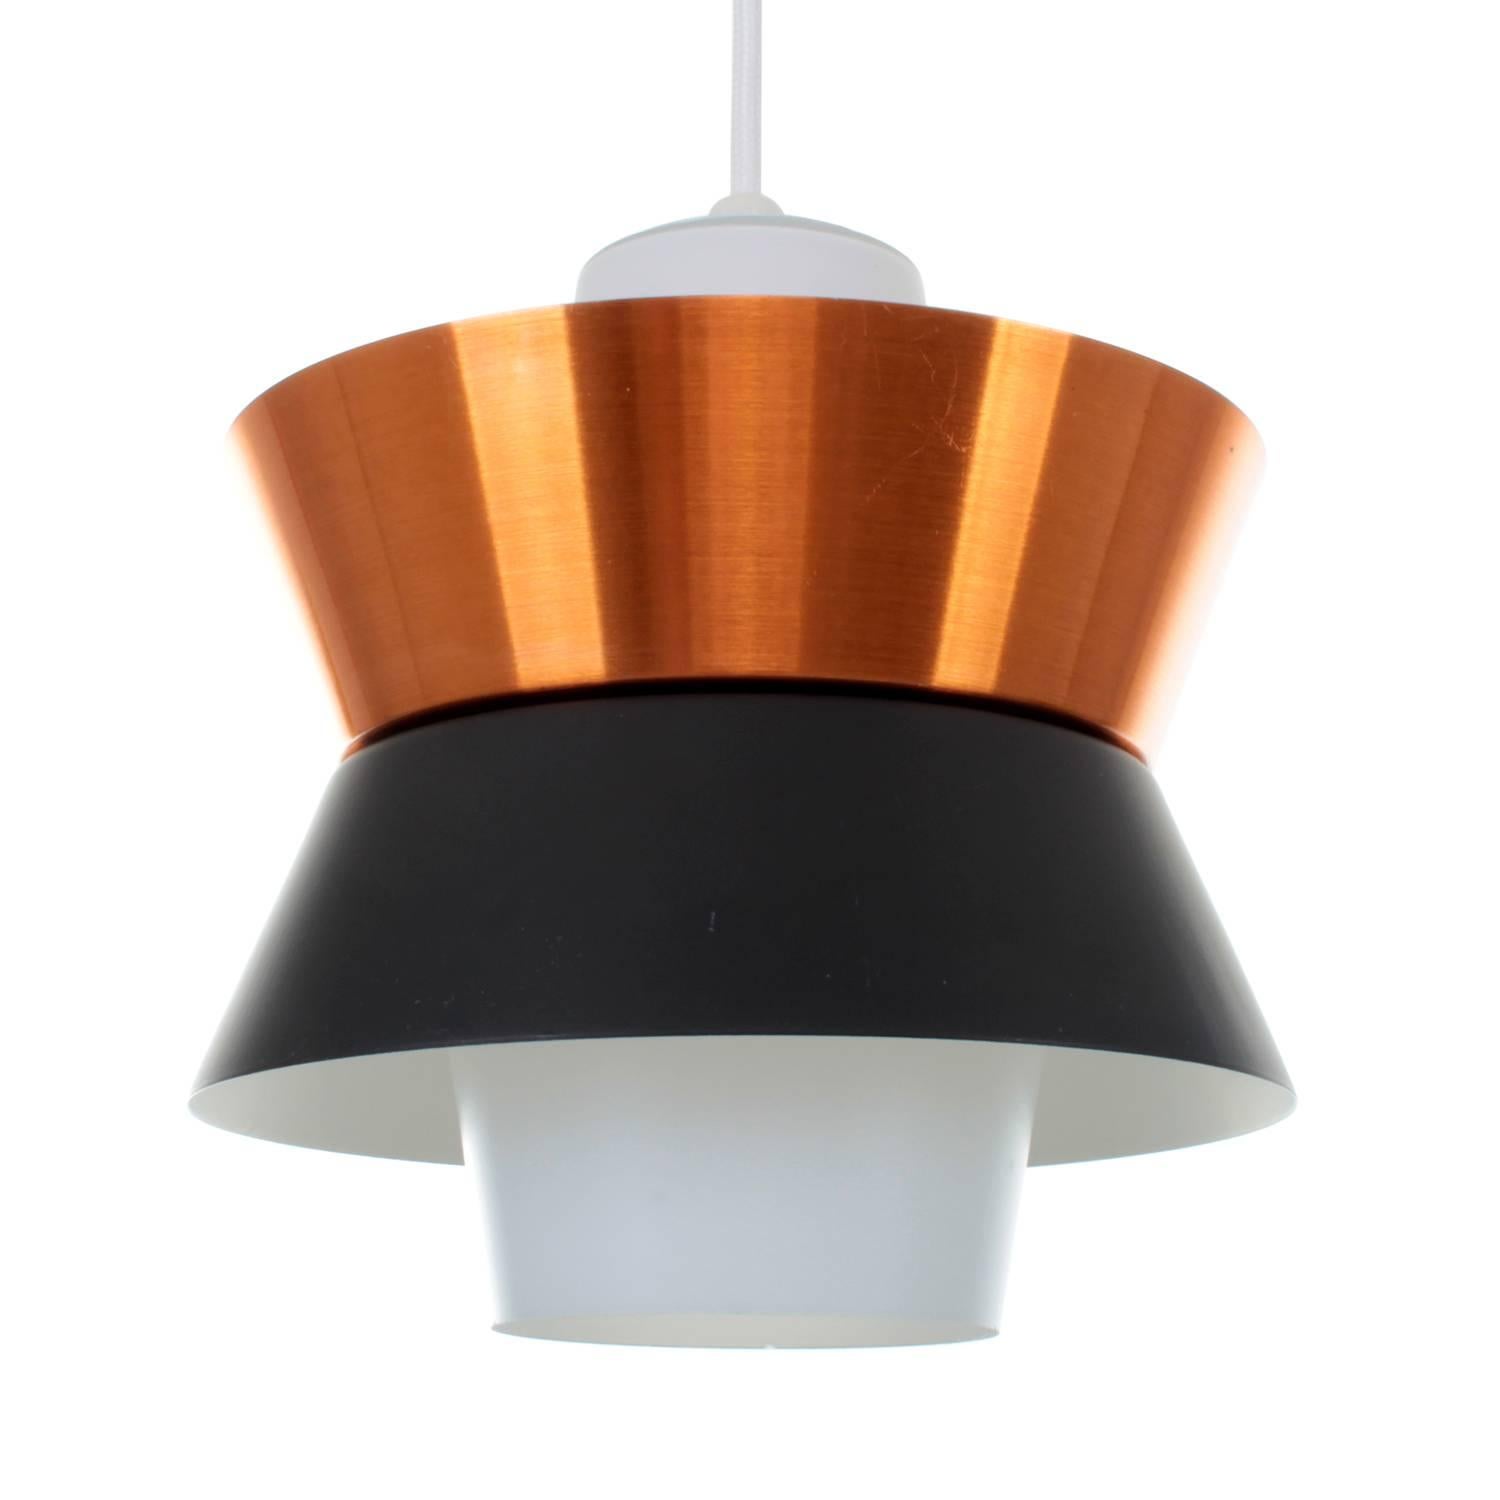 Scandinavian Modern Copper and Black Pendant by Voss in the 1950s, Danish Midcentury Ceiling Light For Sale